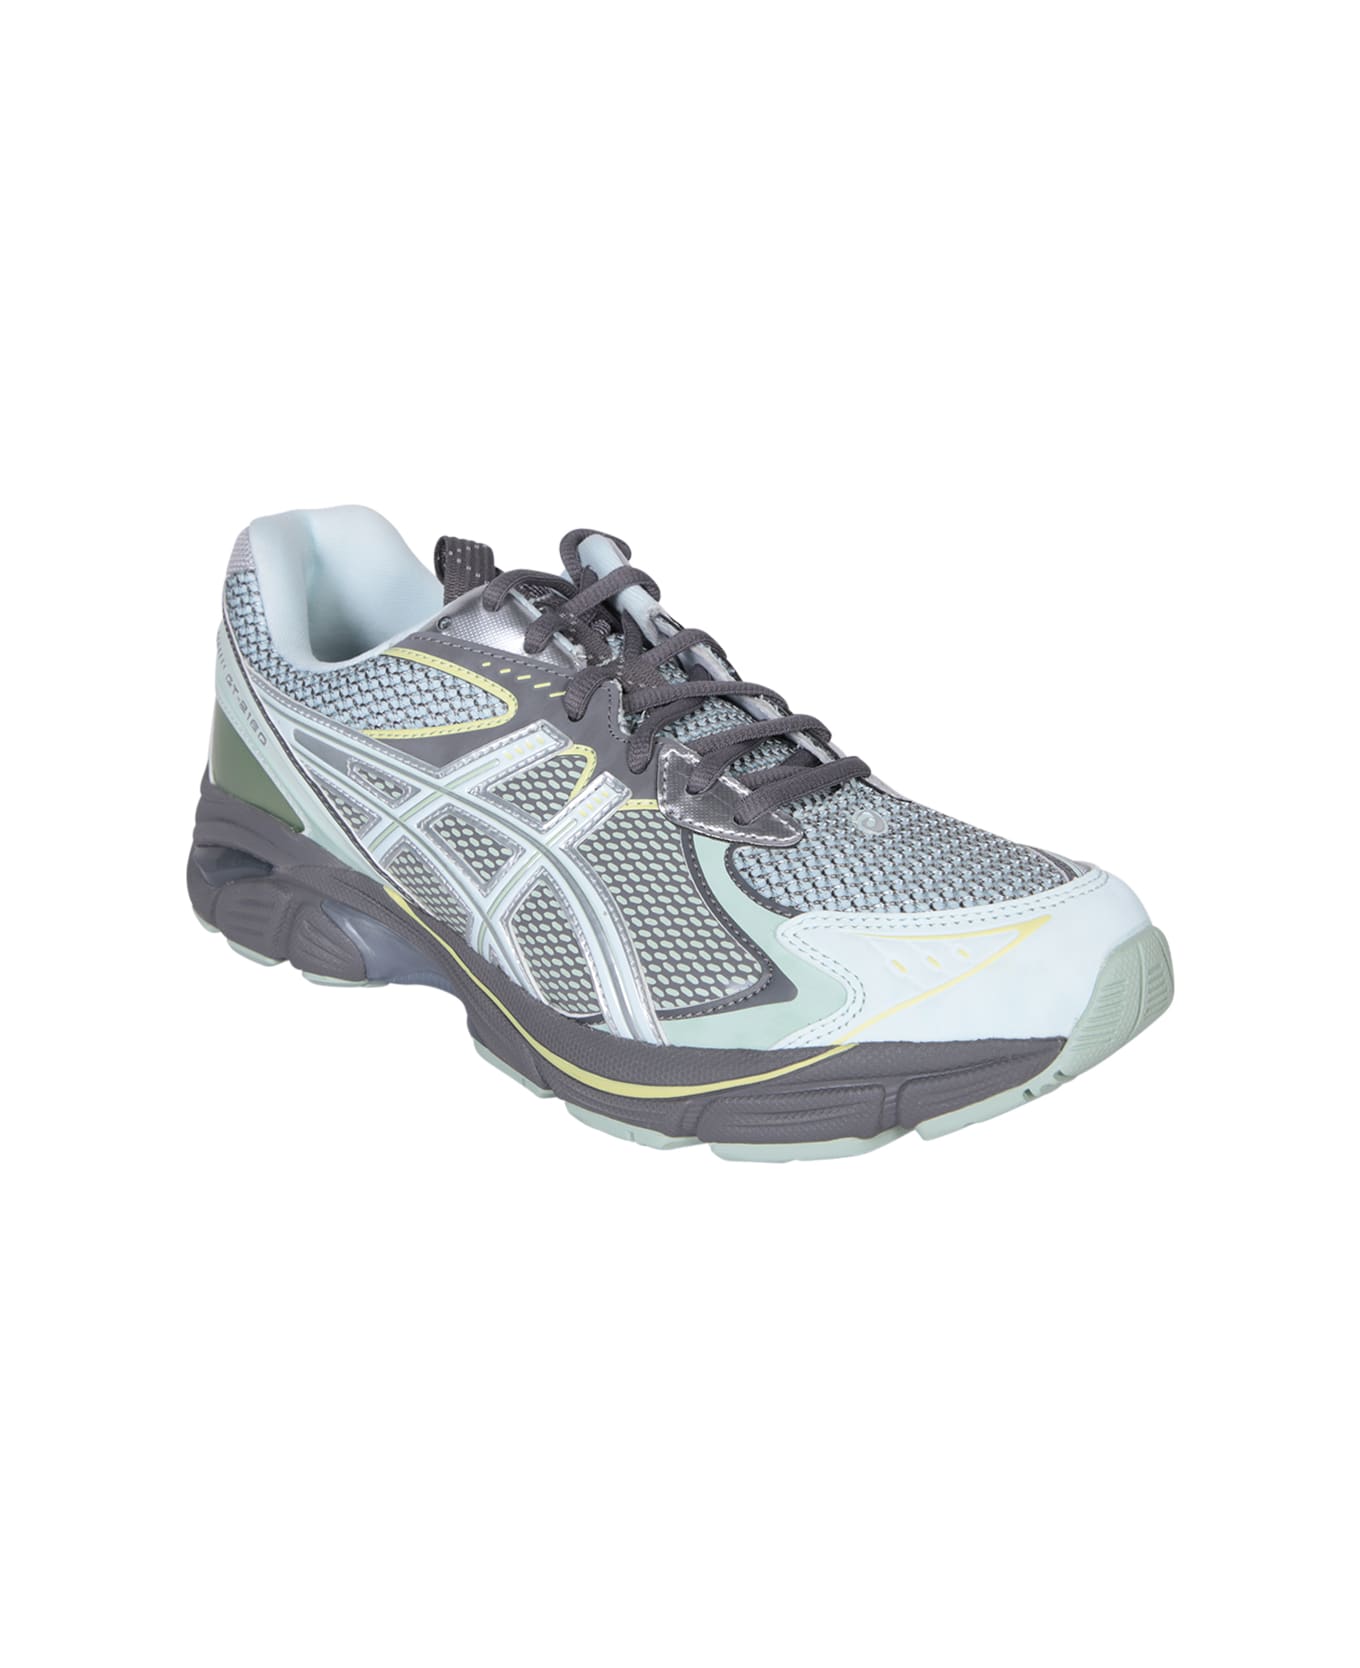 Asics Ub6s Gt2160 Sneakers In Grey And Light Blue - Grey